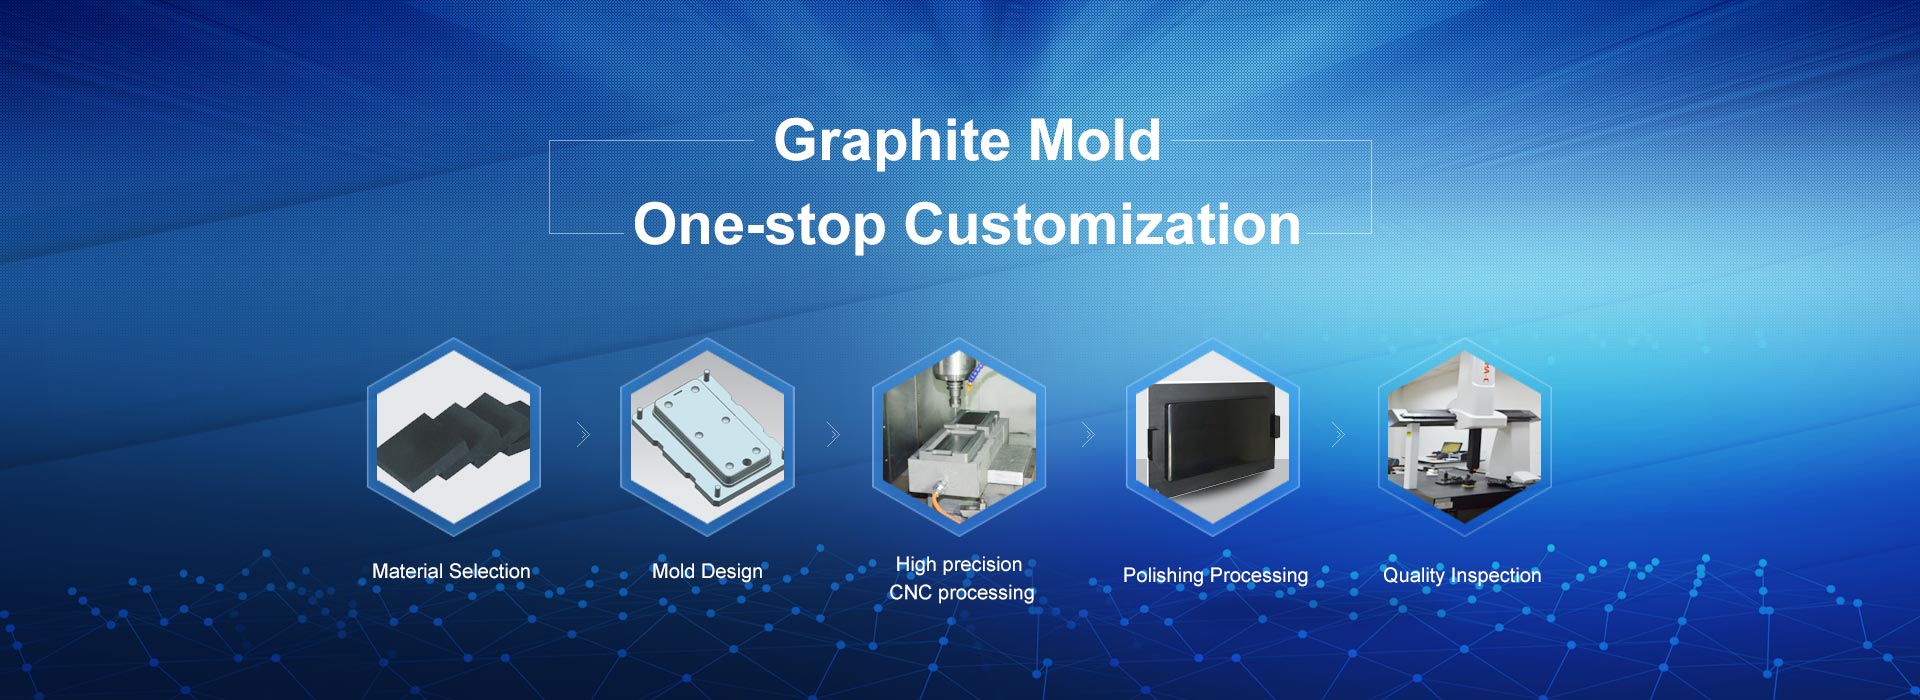 Graphite Mold One-stop Customi